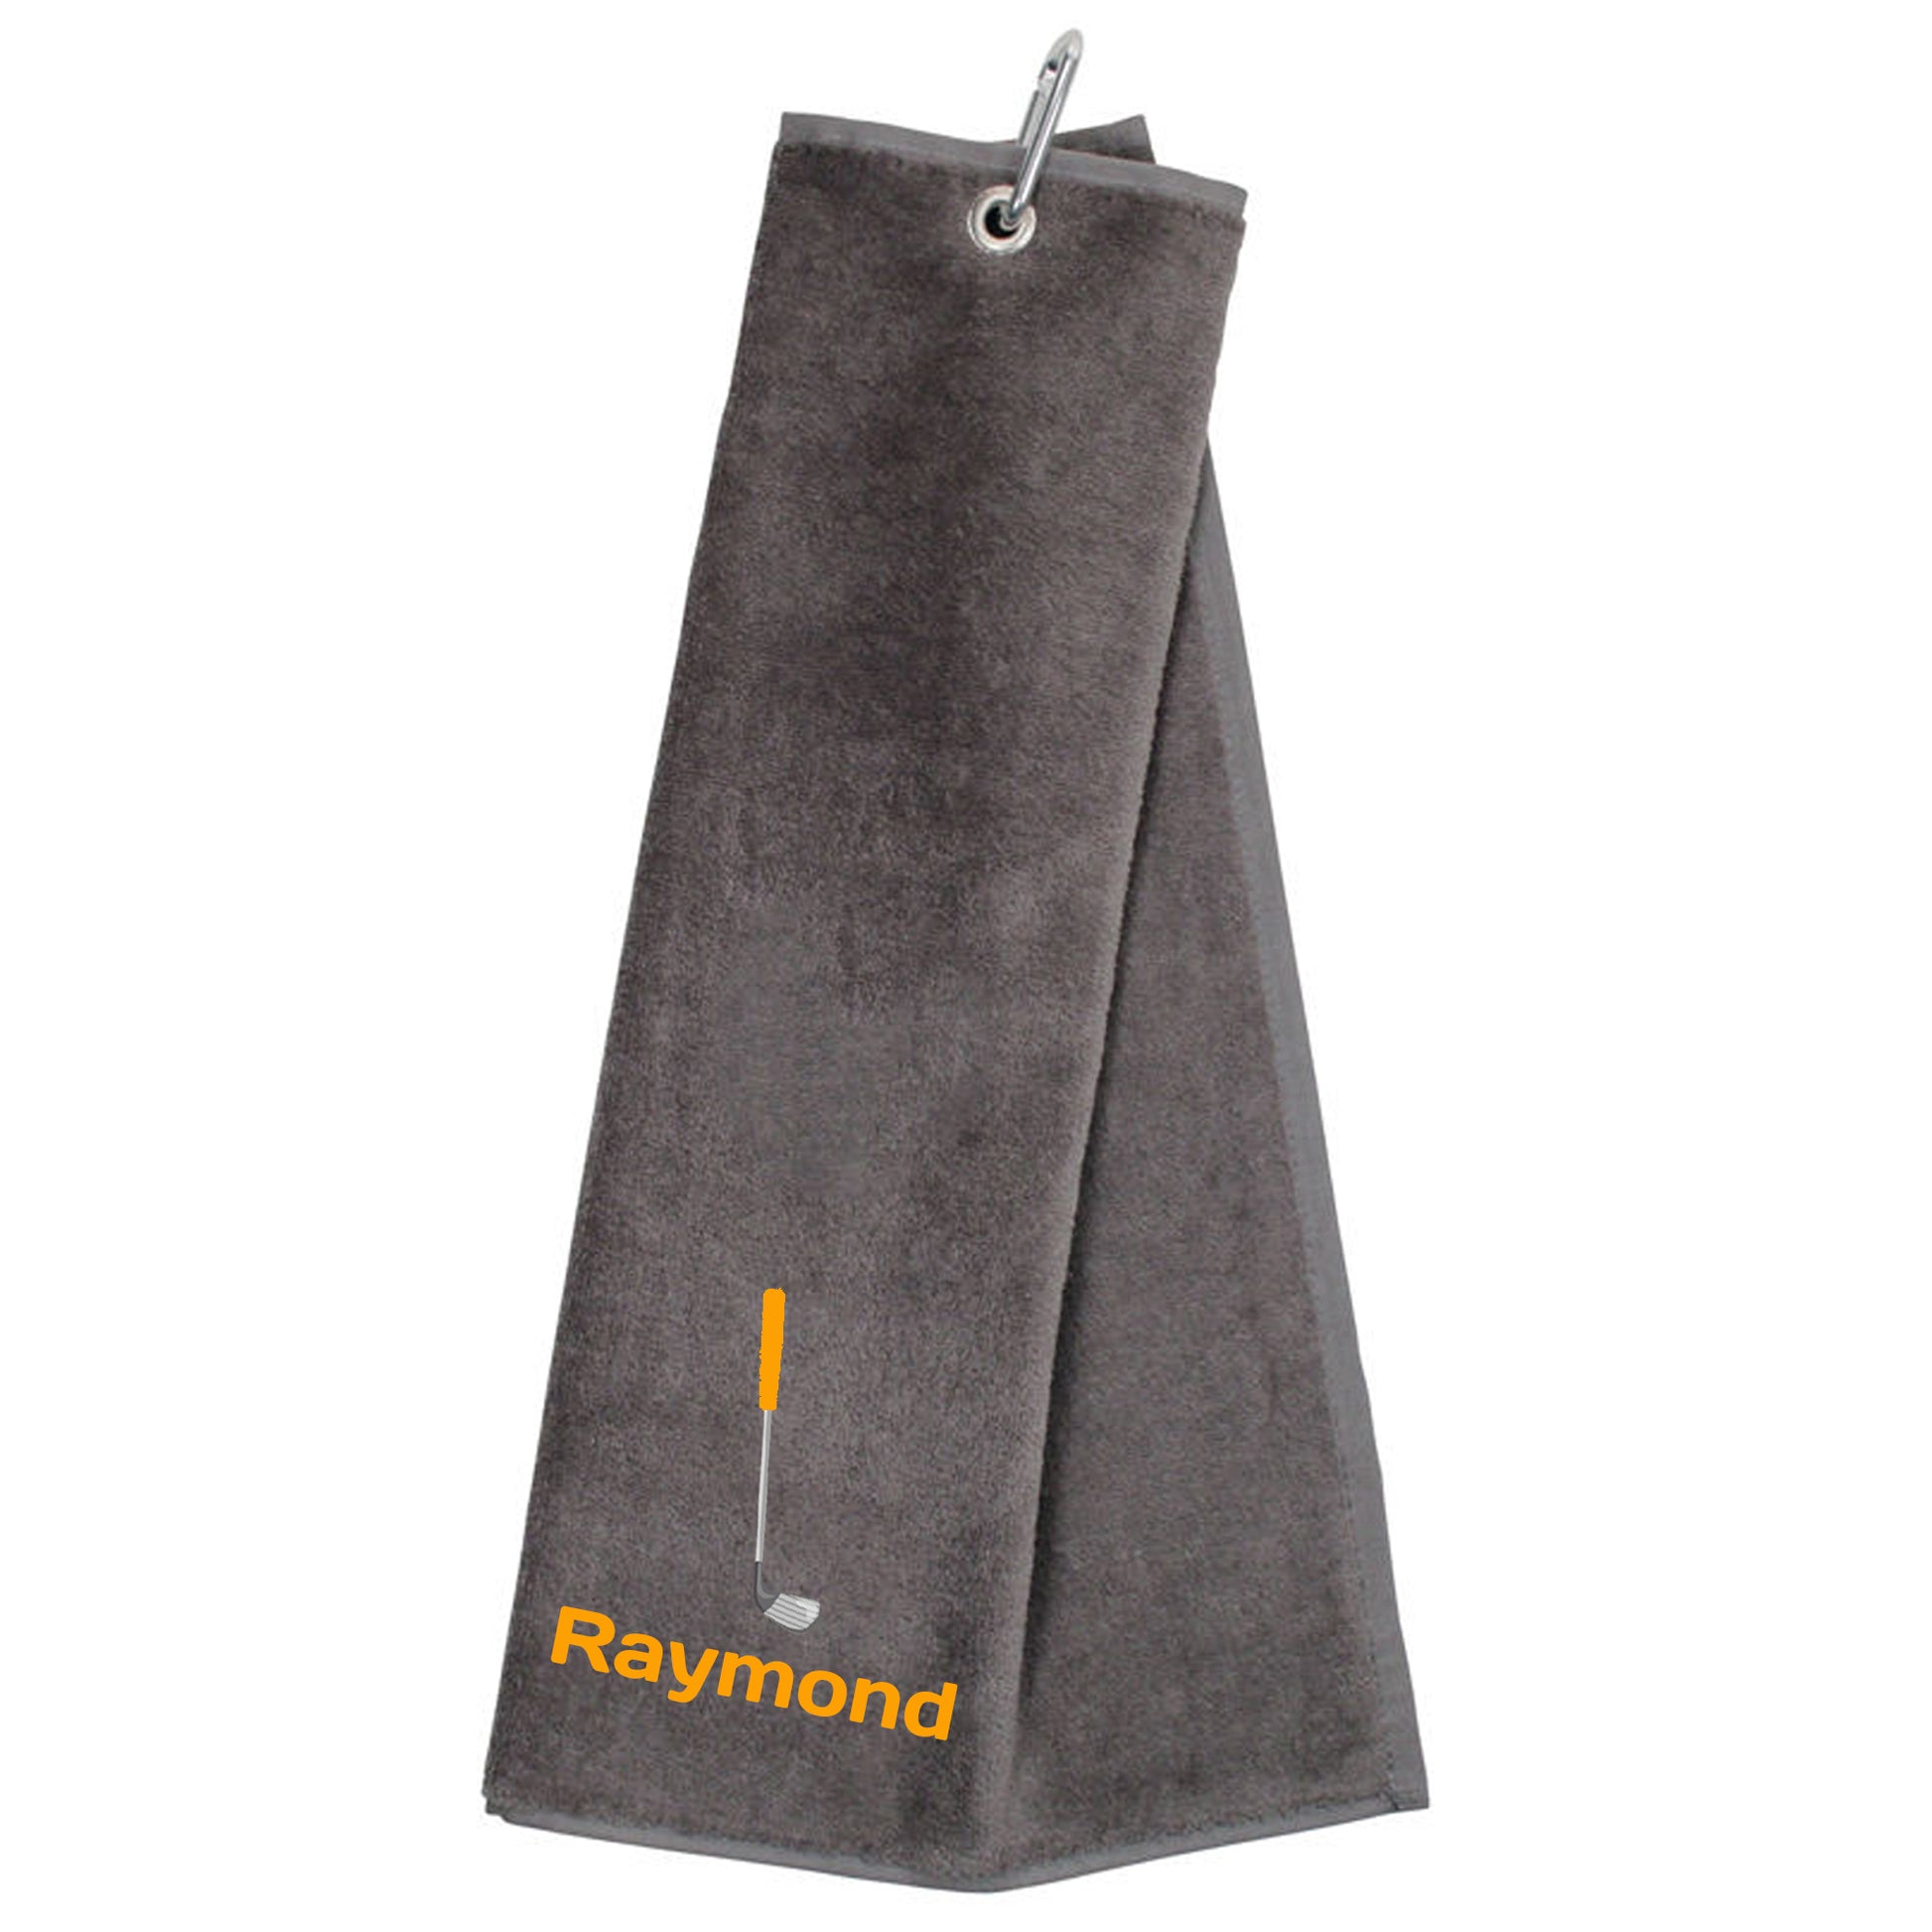 Personalised Embroidered Tri Fold GOLF Towel Trifold Towel with Carabiner Clip  - Always Looking Good - Grey  